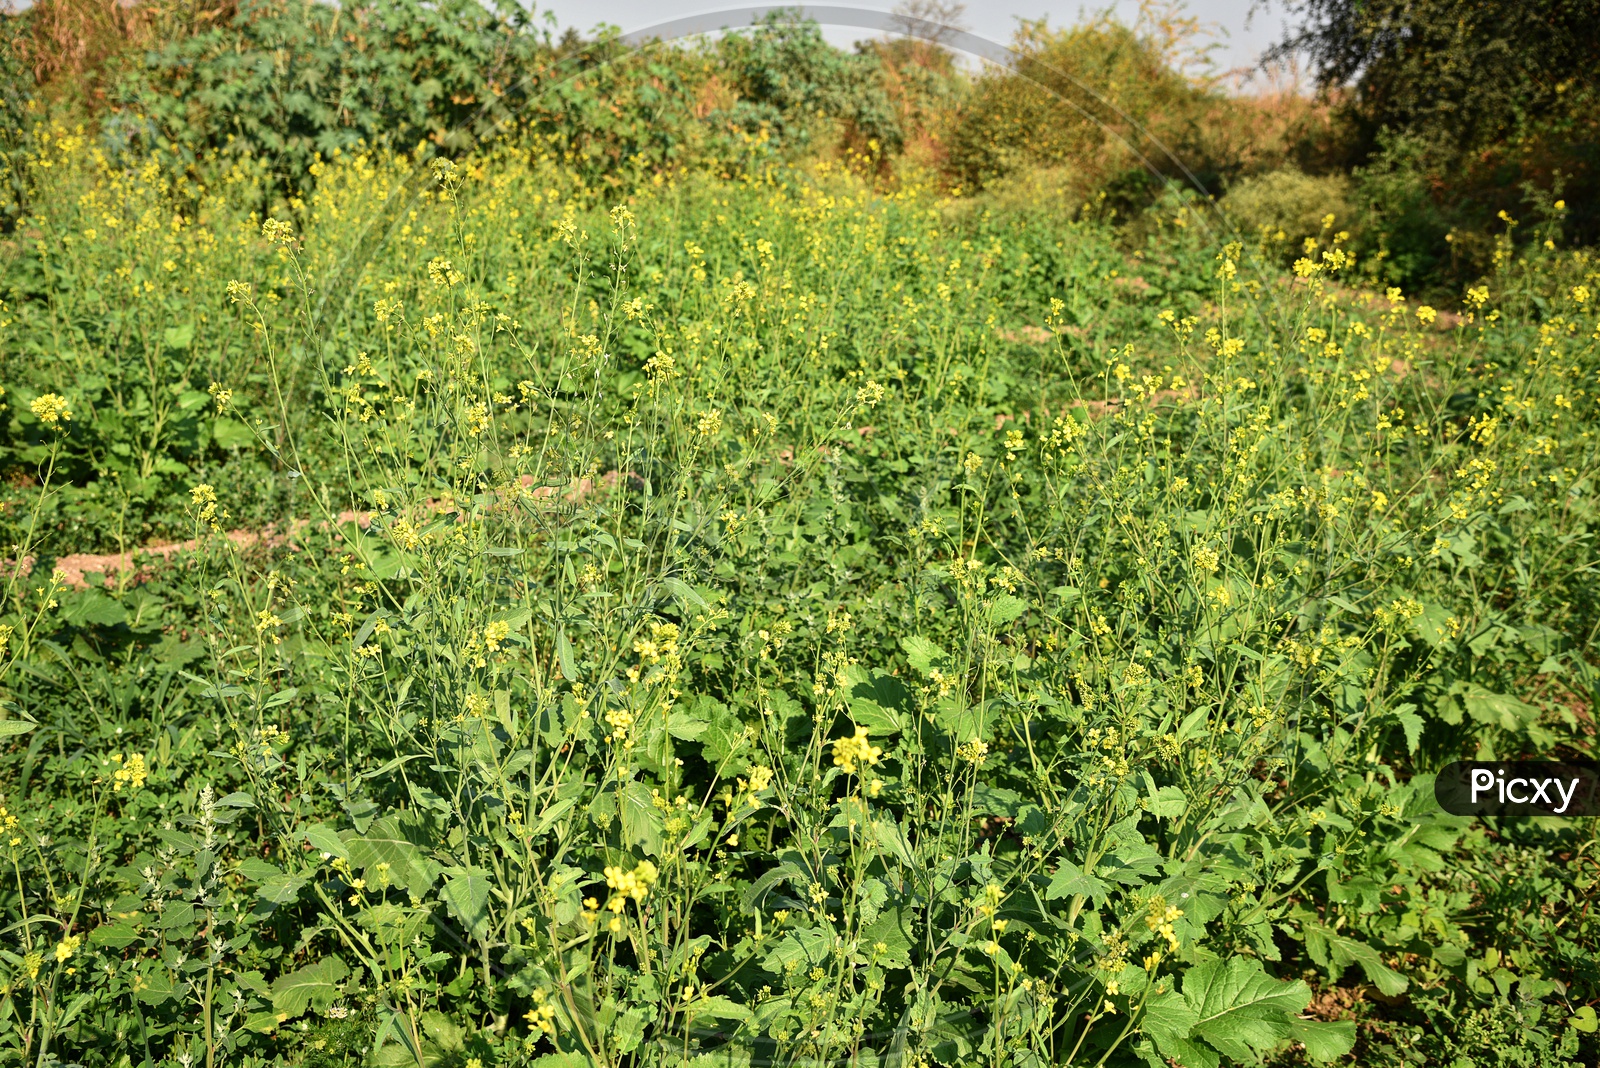 Freshly Growing Green Mustard pods Along With Flowers  On the Plants In an Agricultural Field